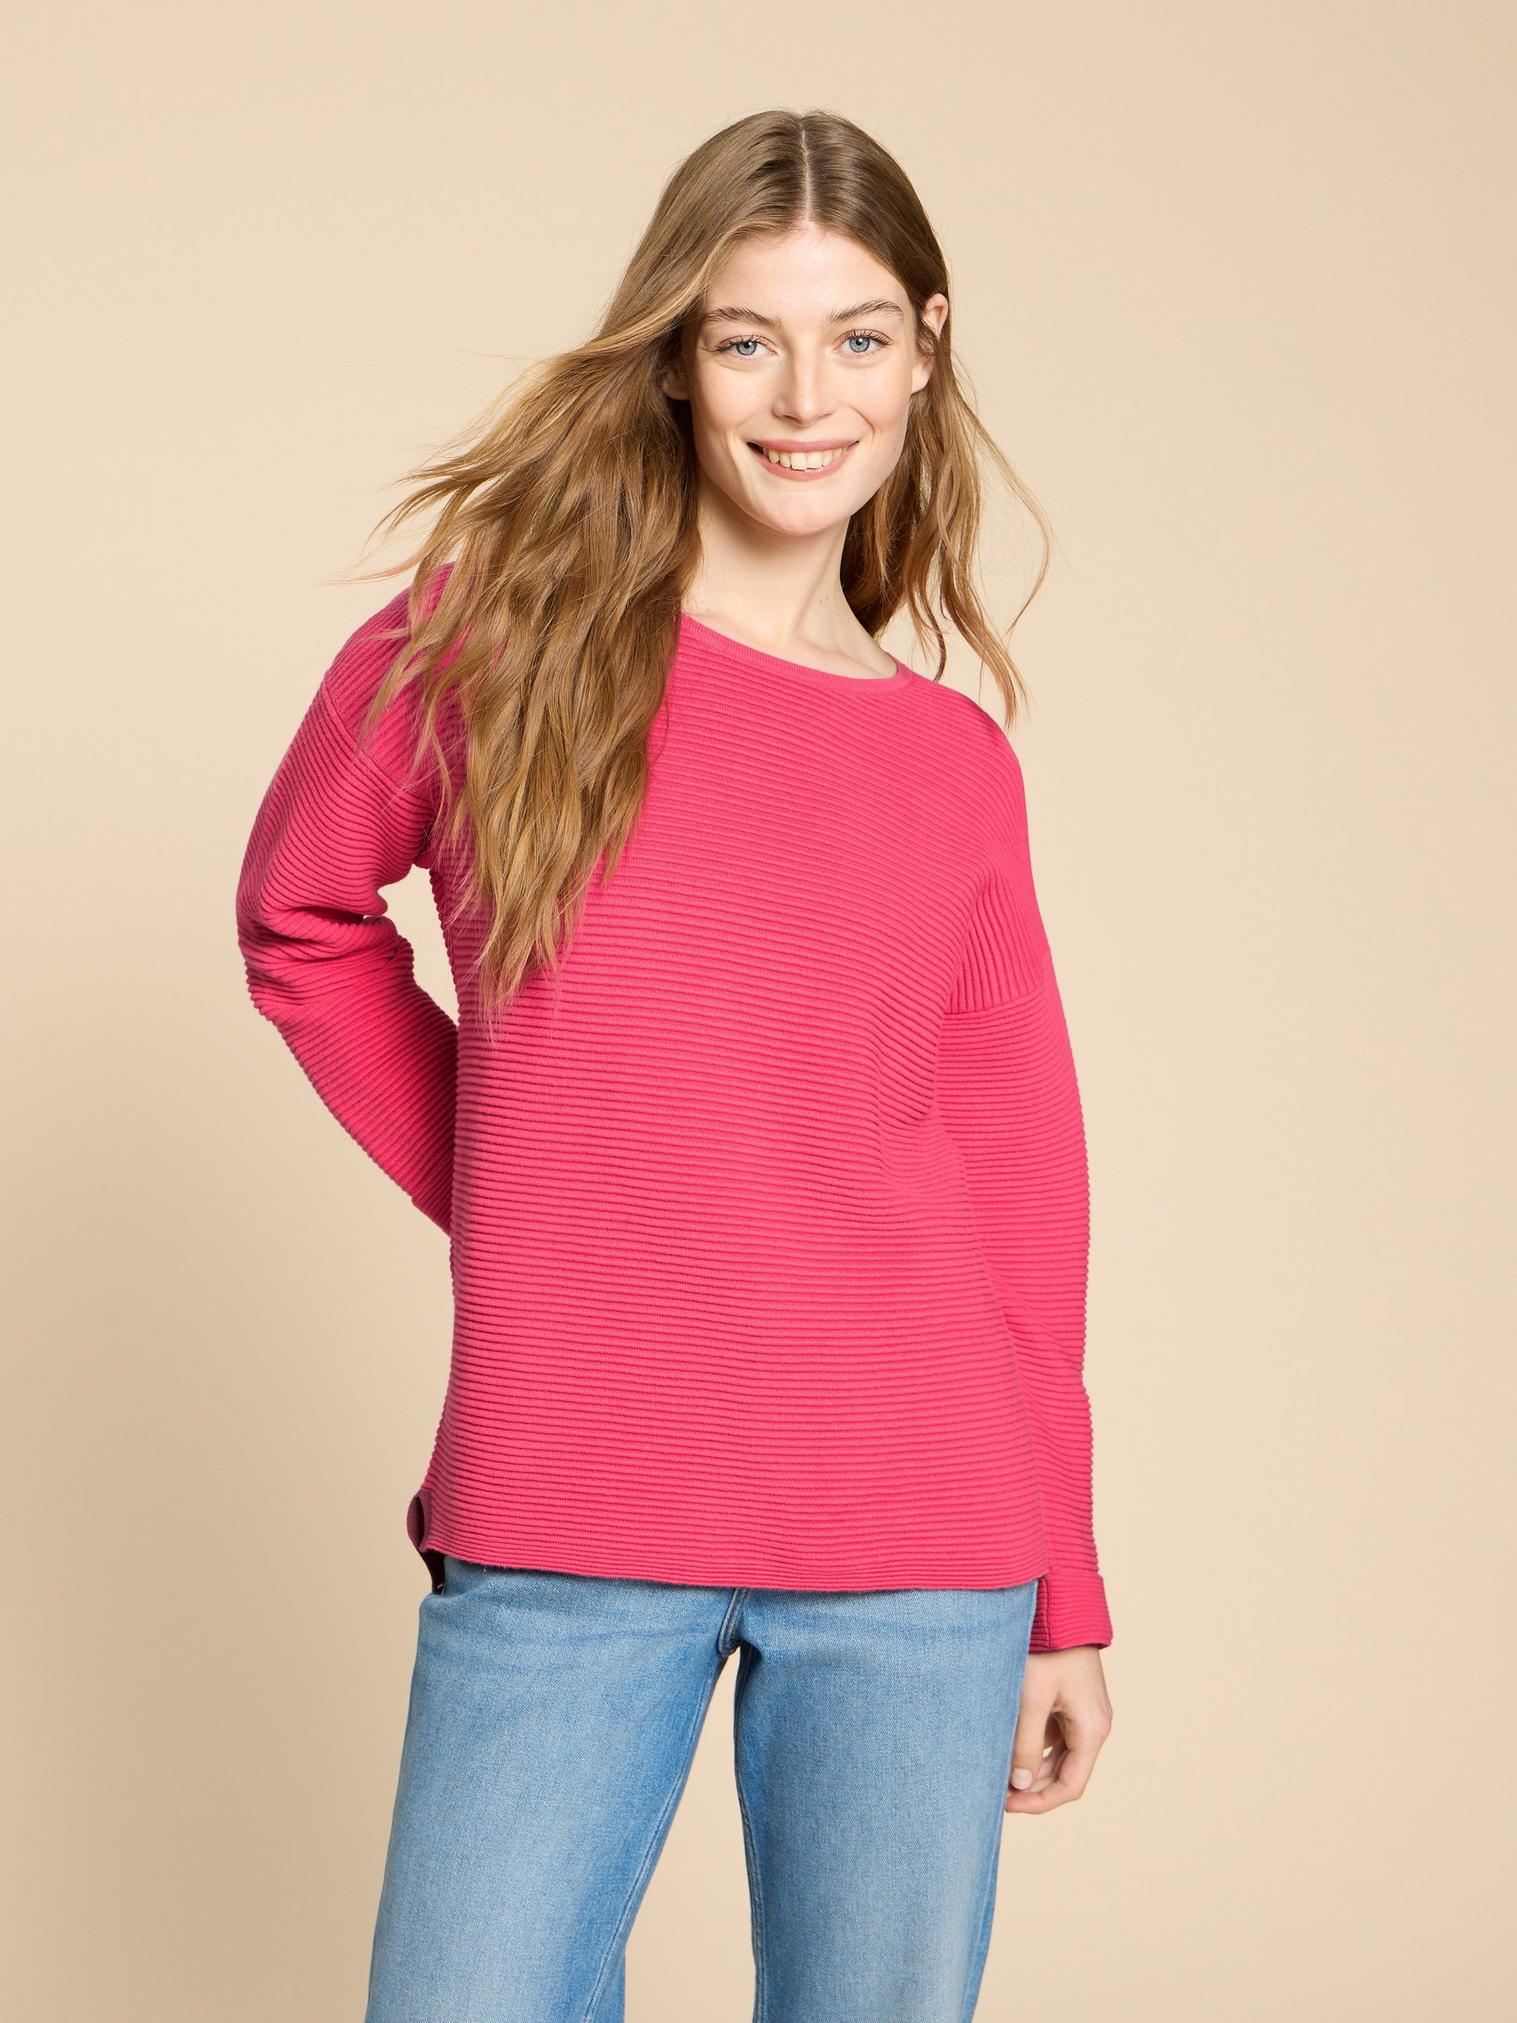 JANA JUMPER in MID PINK - LIFESTYLE